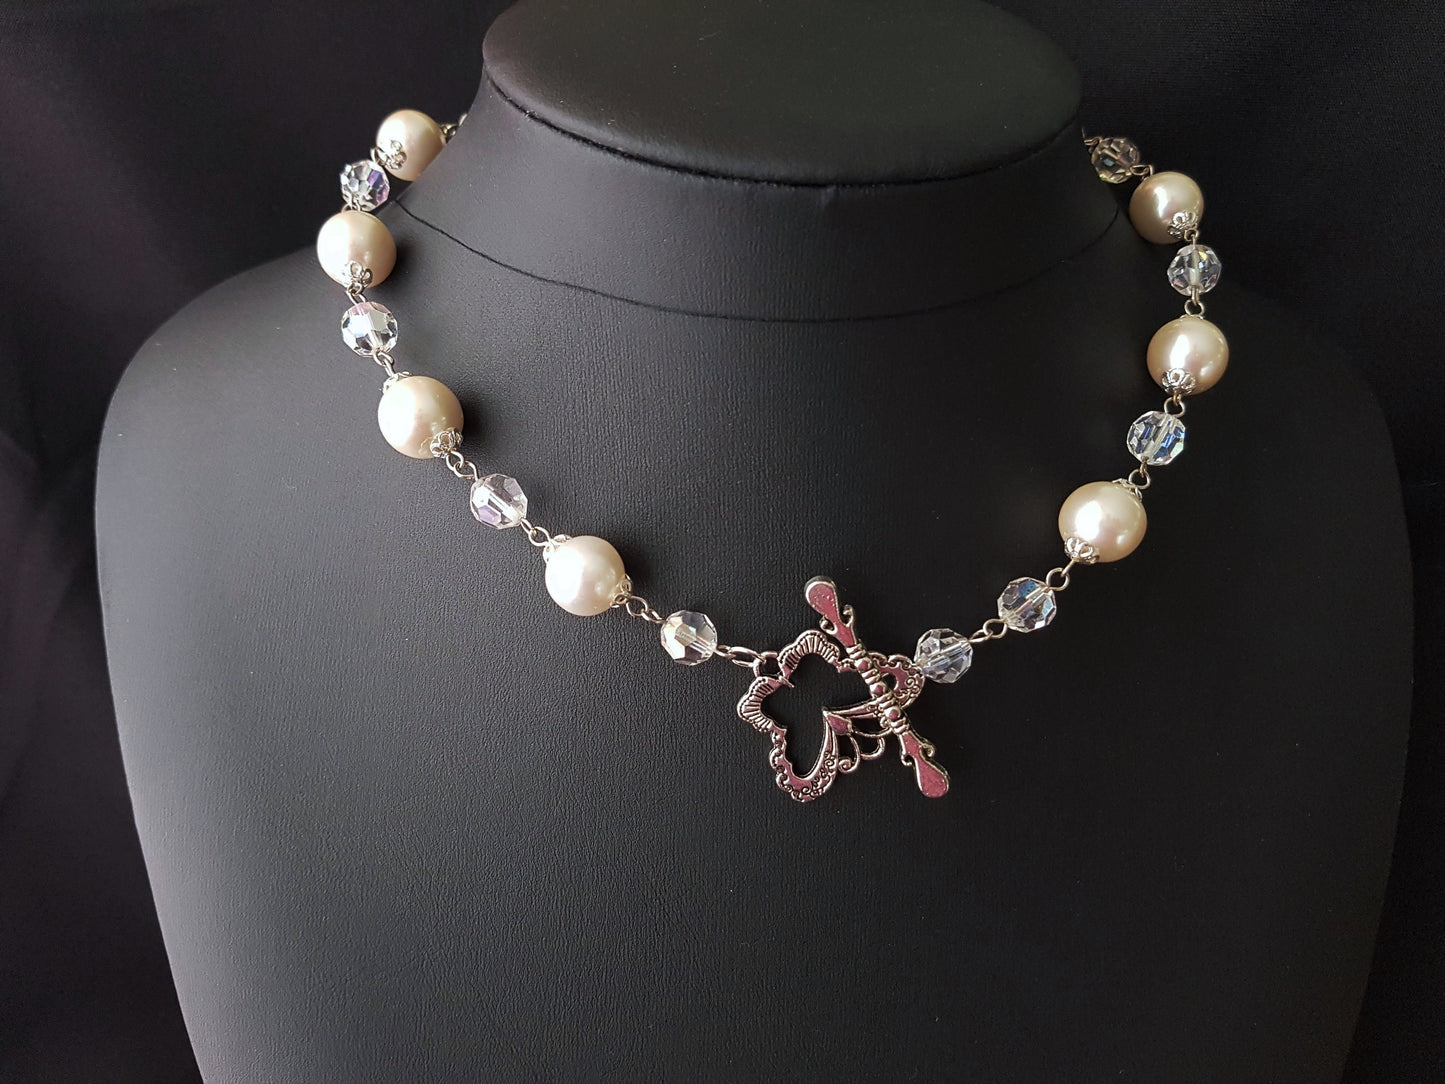 Vintage Pearl, Crystal Butterfly Necklace and Earring Set, OOAK Set-Vintage Off White Pearls, Vintage Crystal